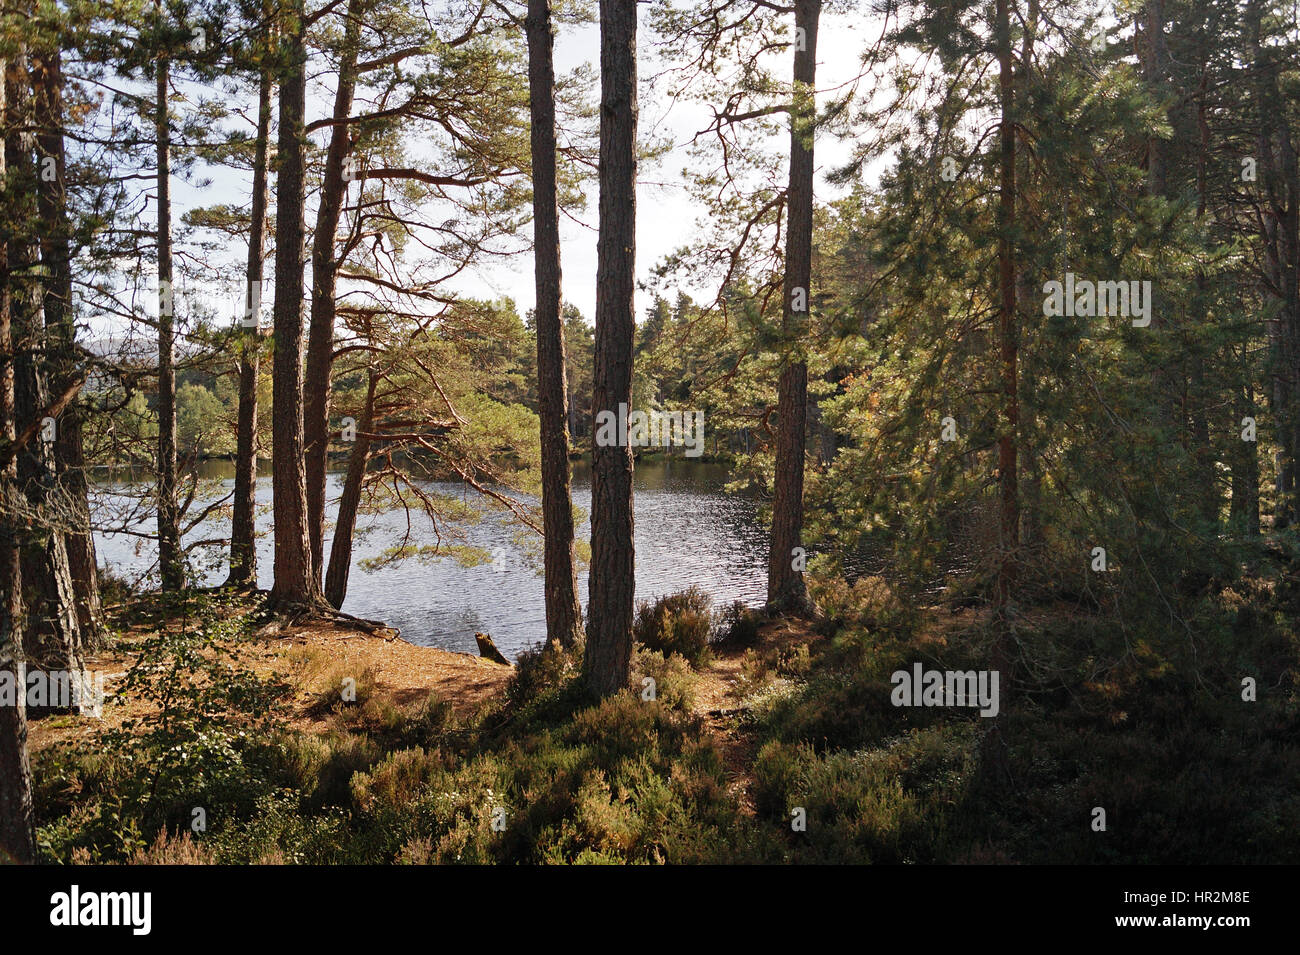 View overlooking Uath Lochans Through the Trees Stock Photo